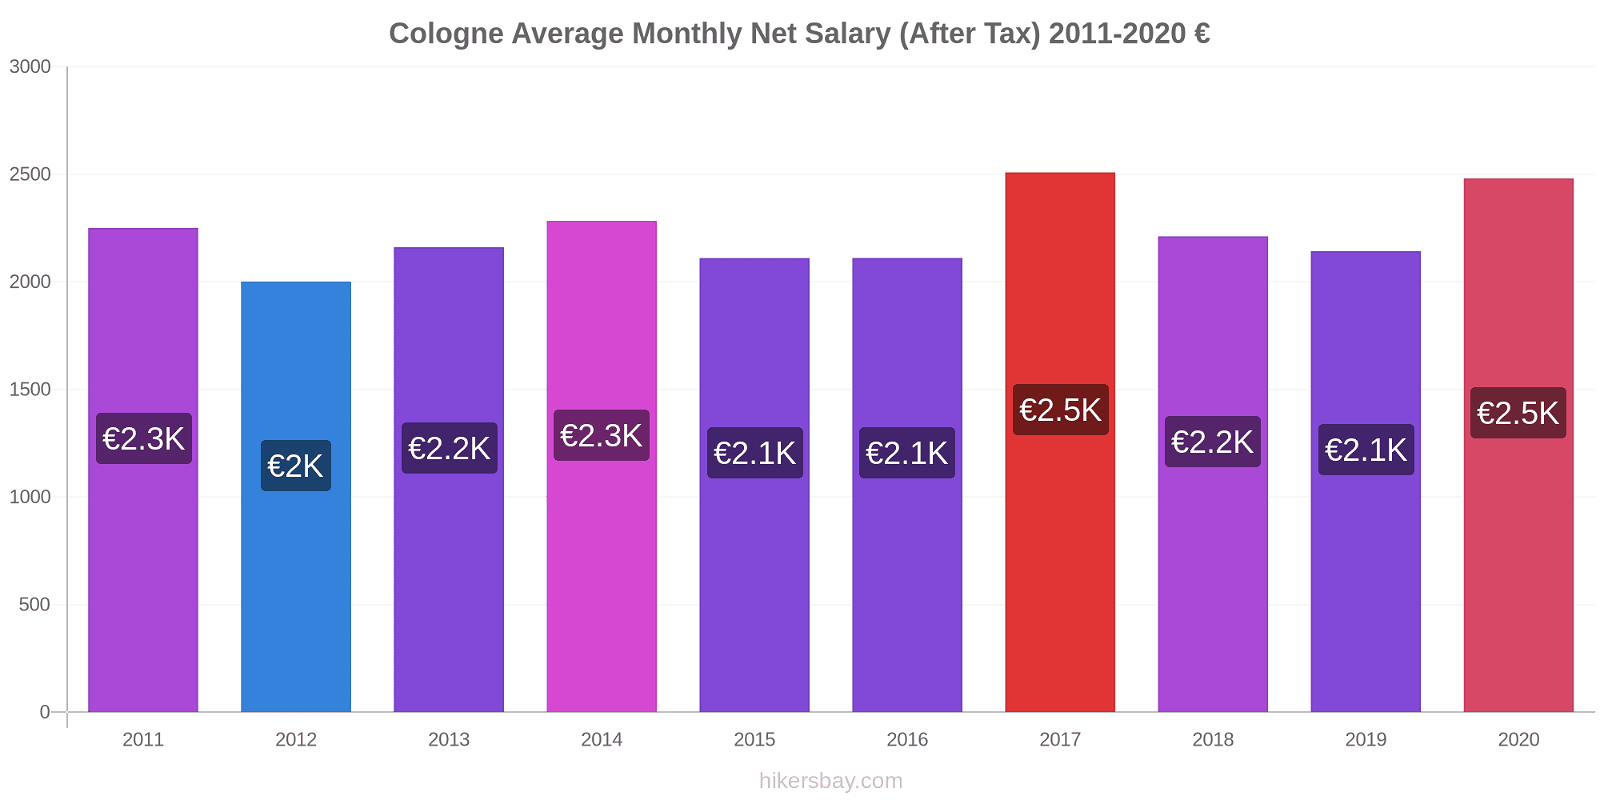 Cologne price changes Average Monthly Net Salary (After Tax) hikersbay.com